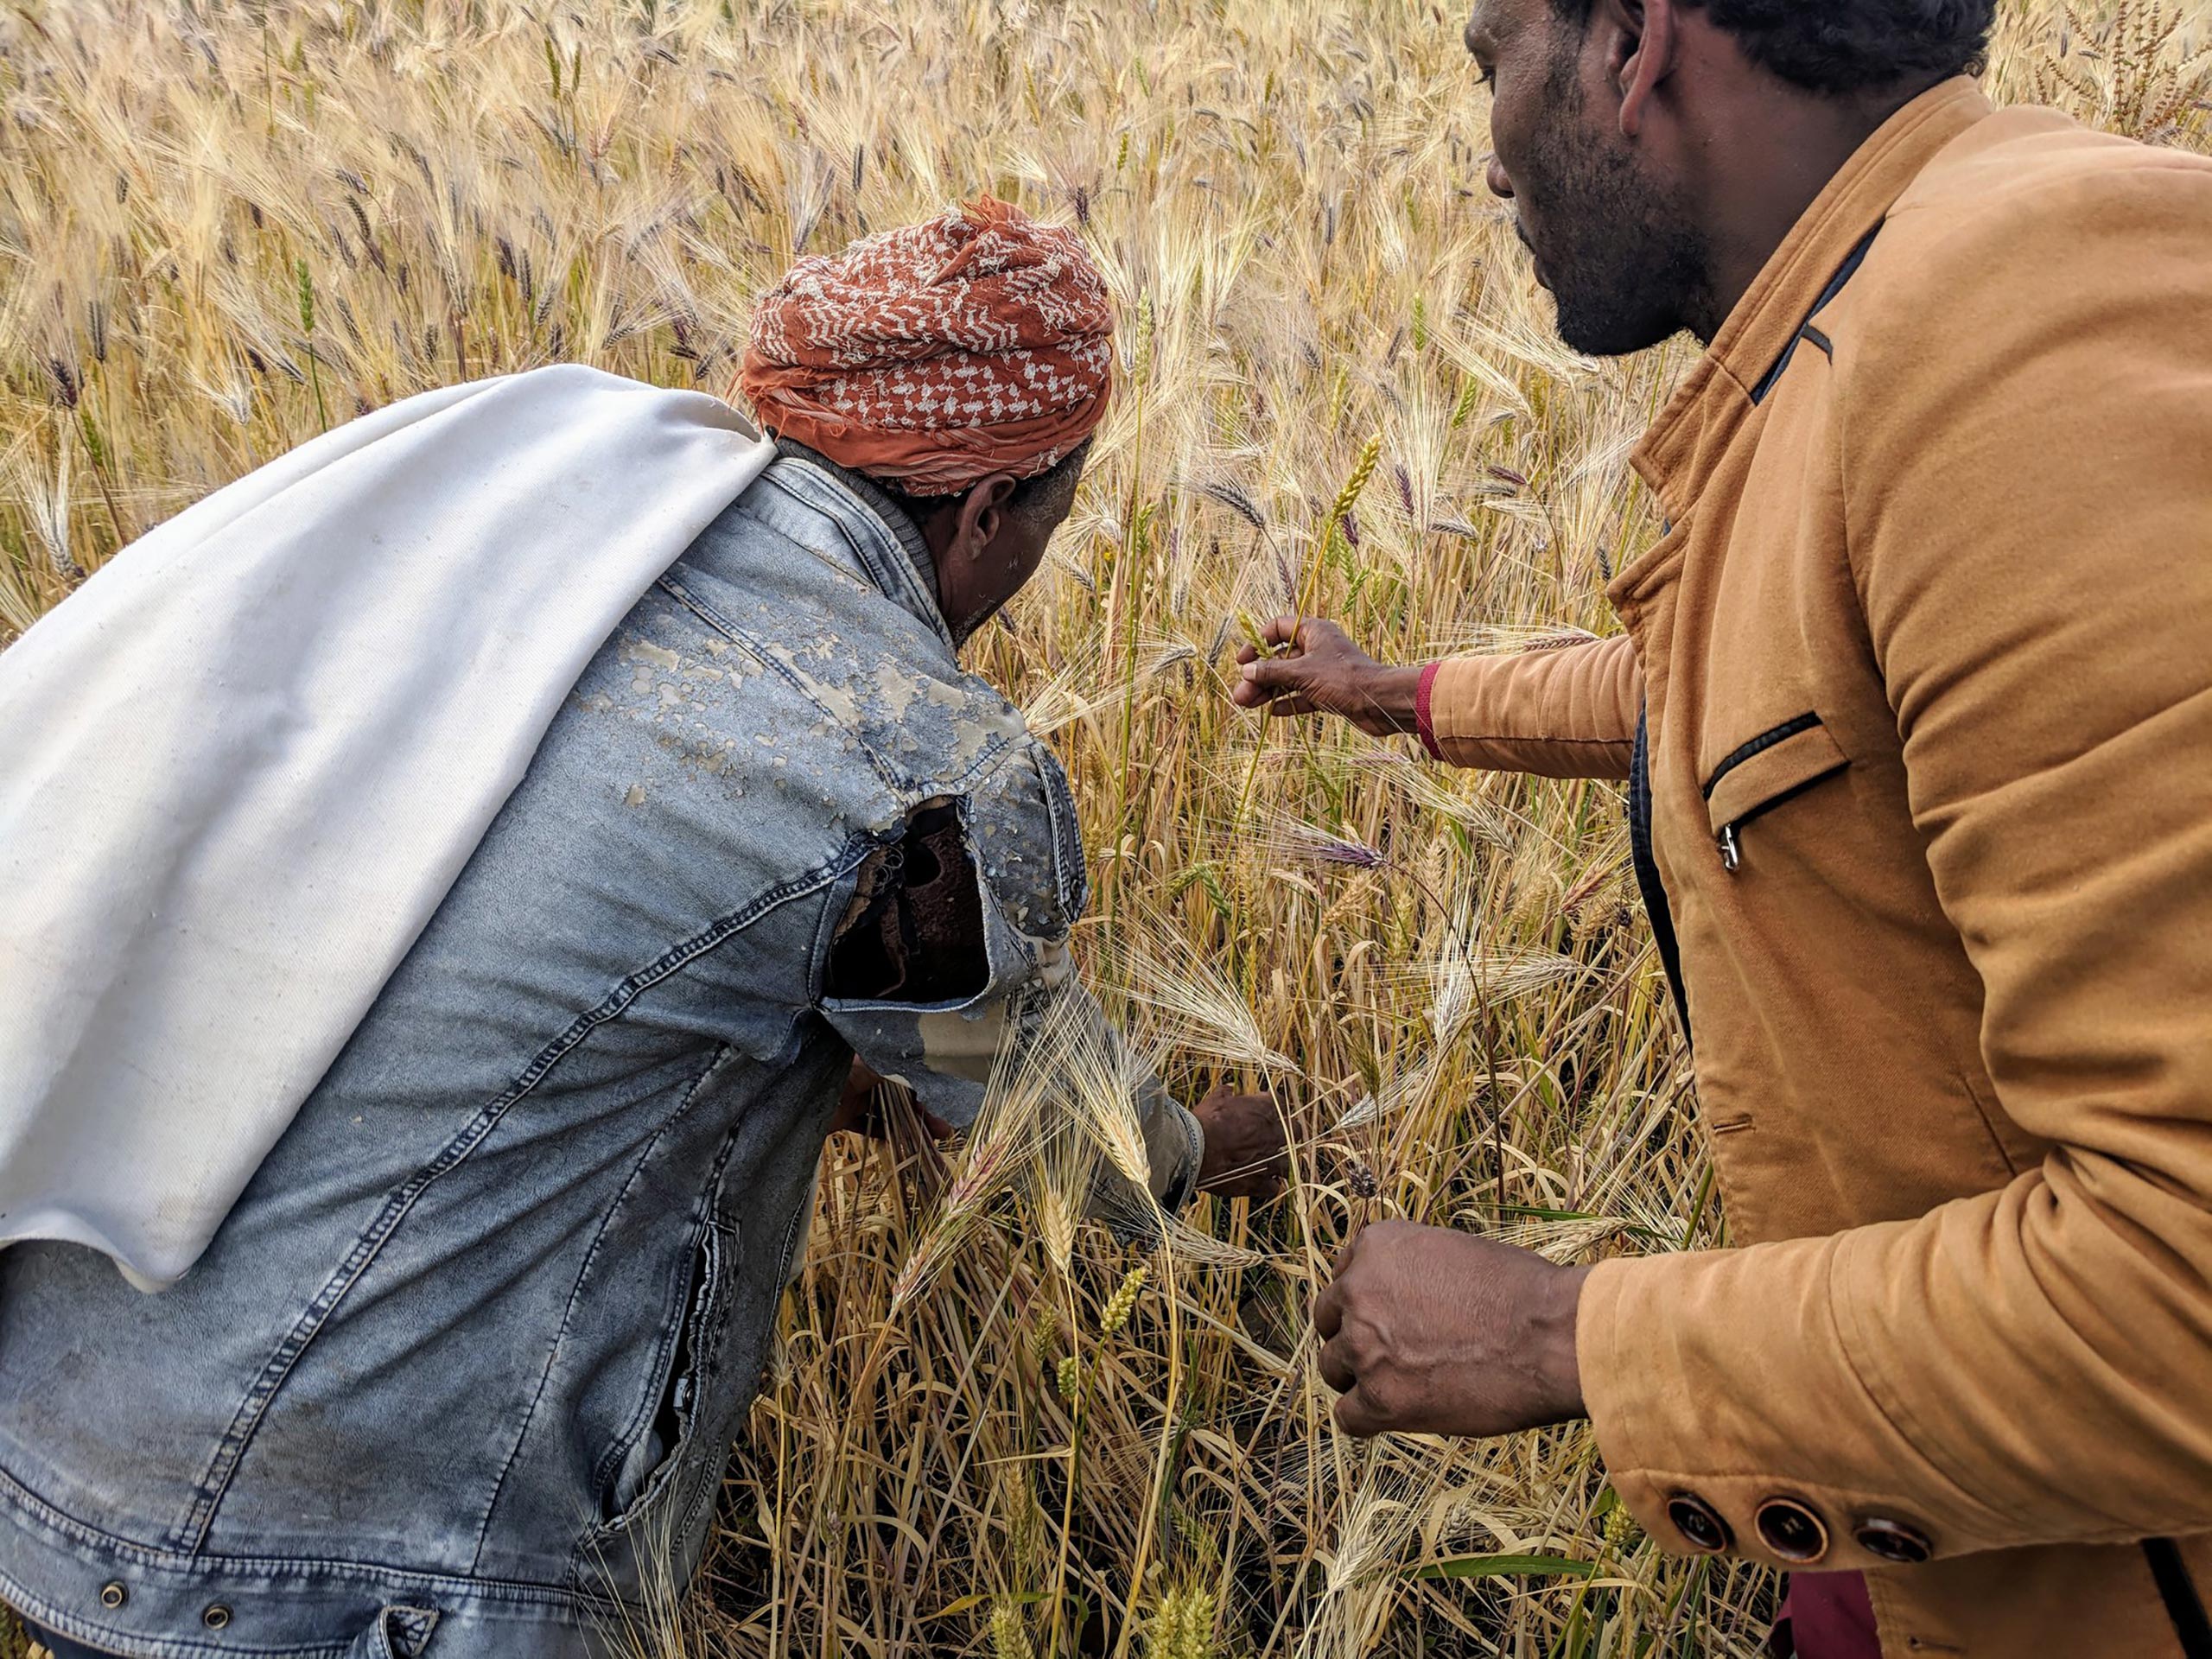 A researchers and farmer working together on sustainable agricultural production in Ethiopia